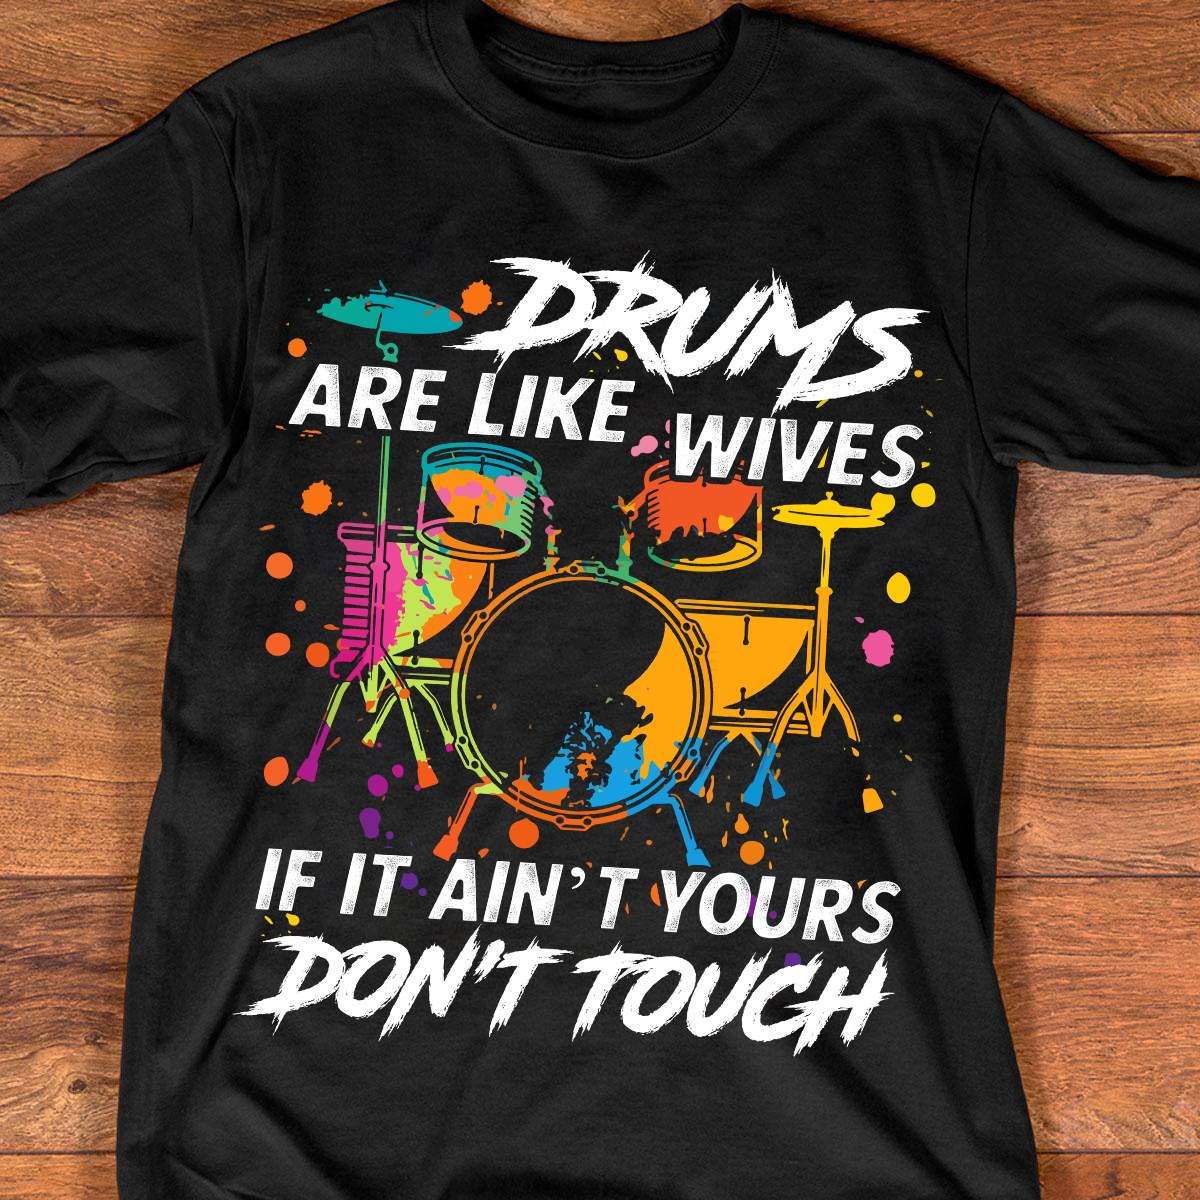 Drums are like wives, if it ain't yours don't touch - Wife and husband, passionate drummer